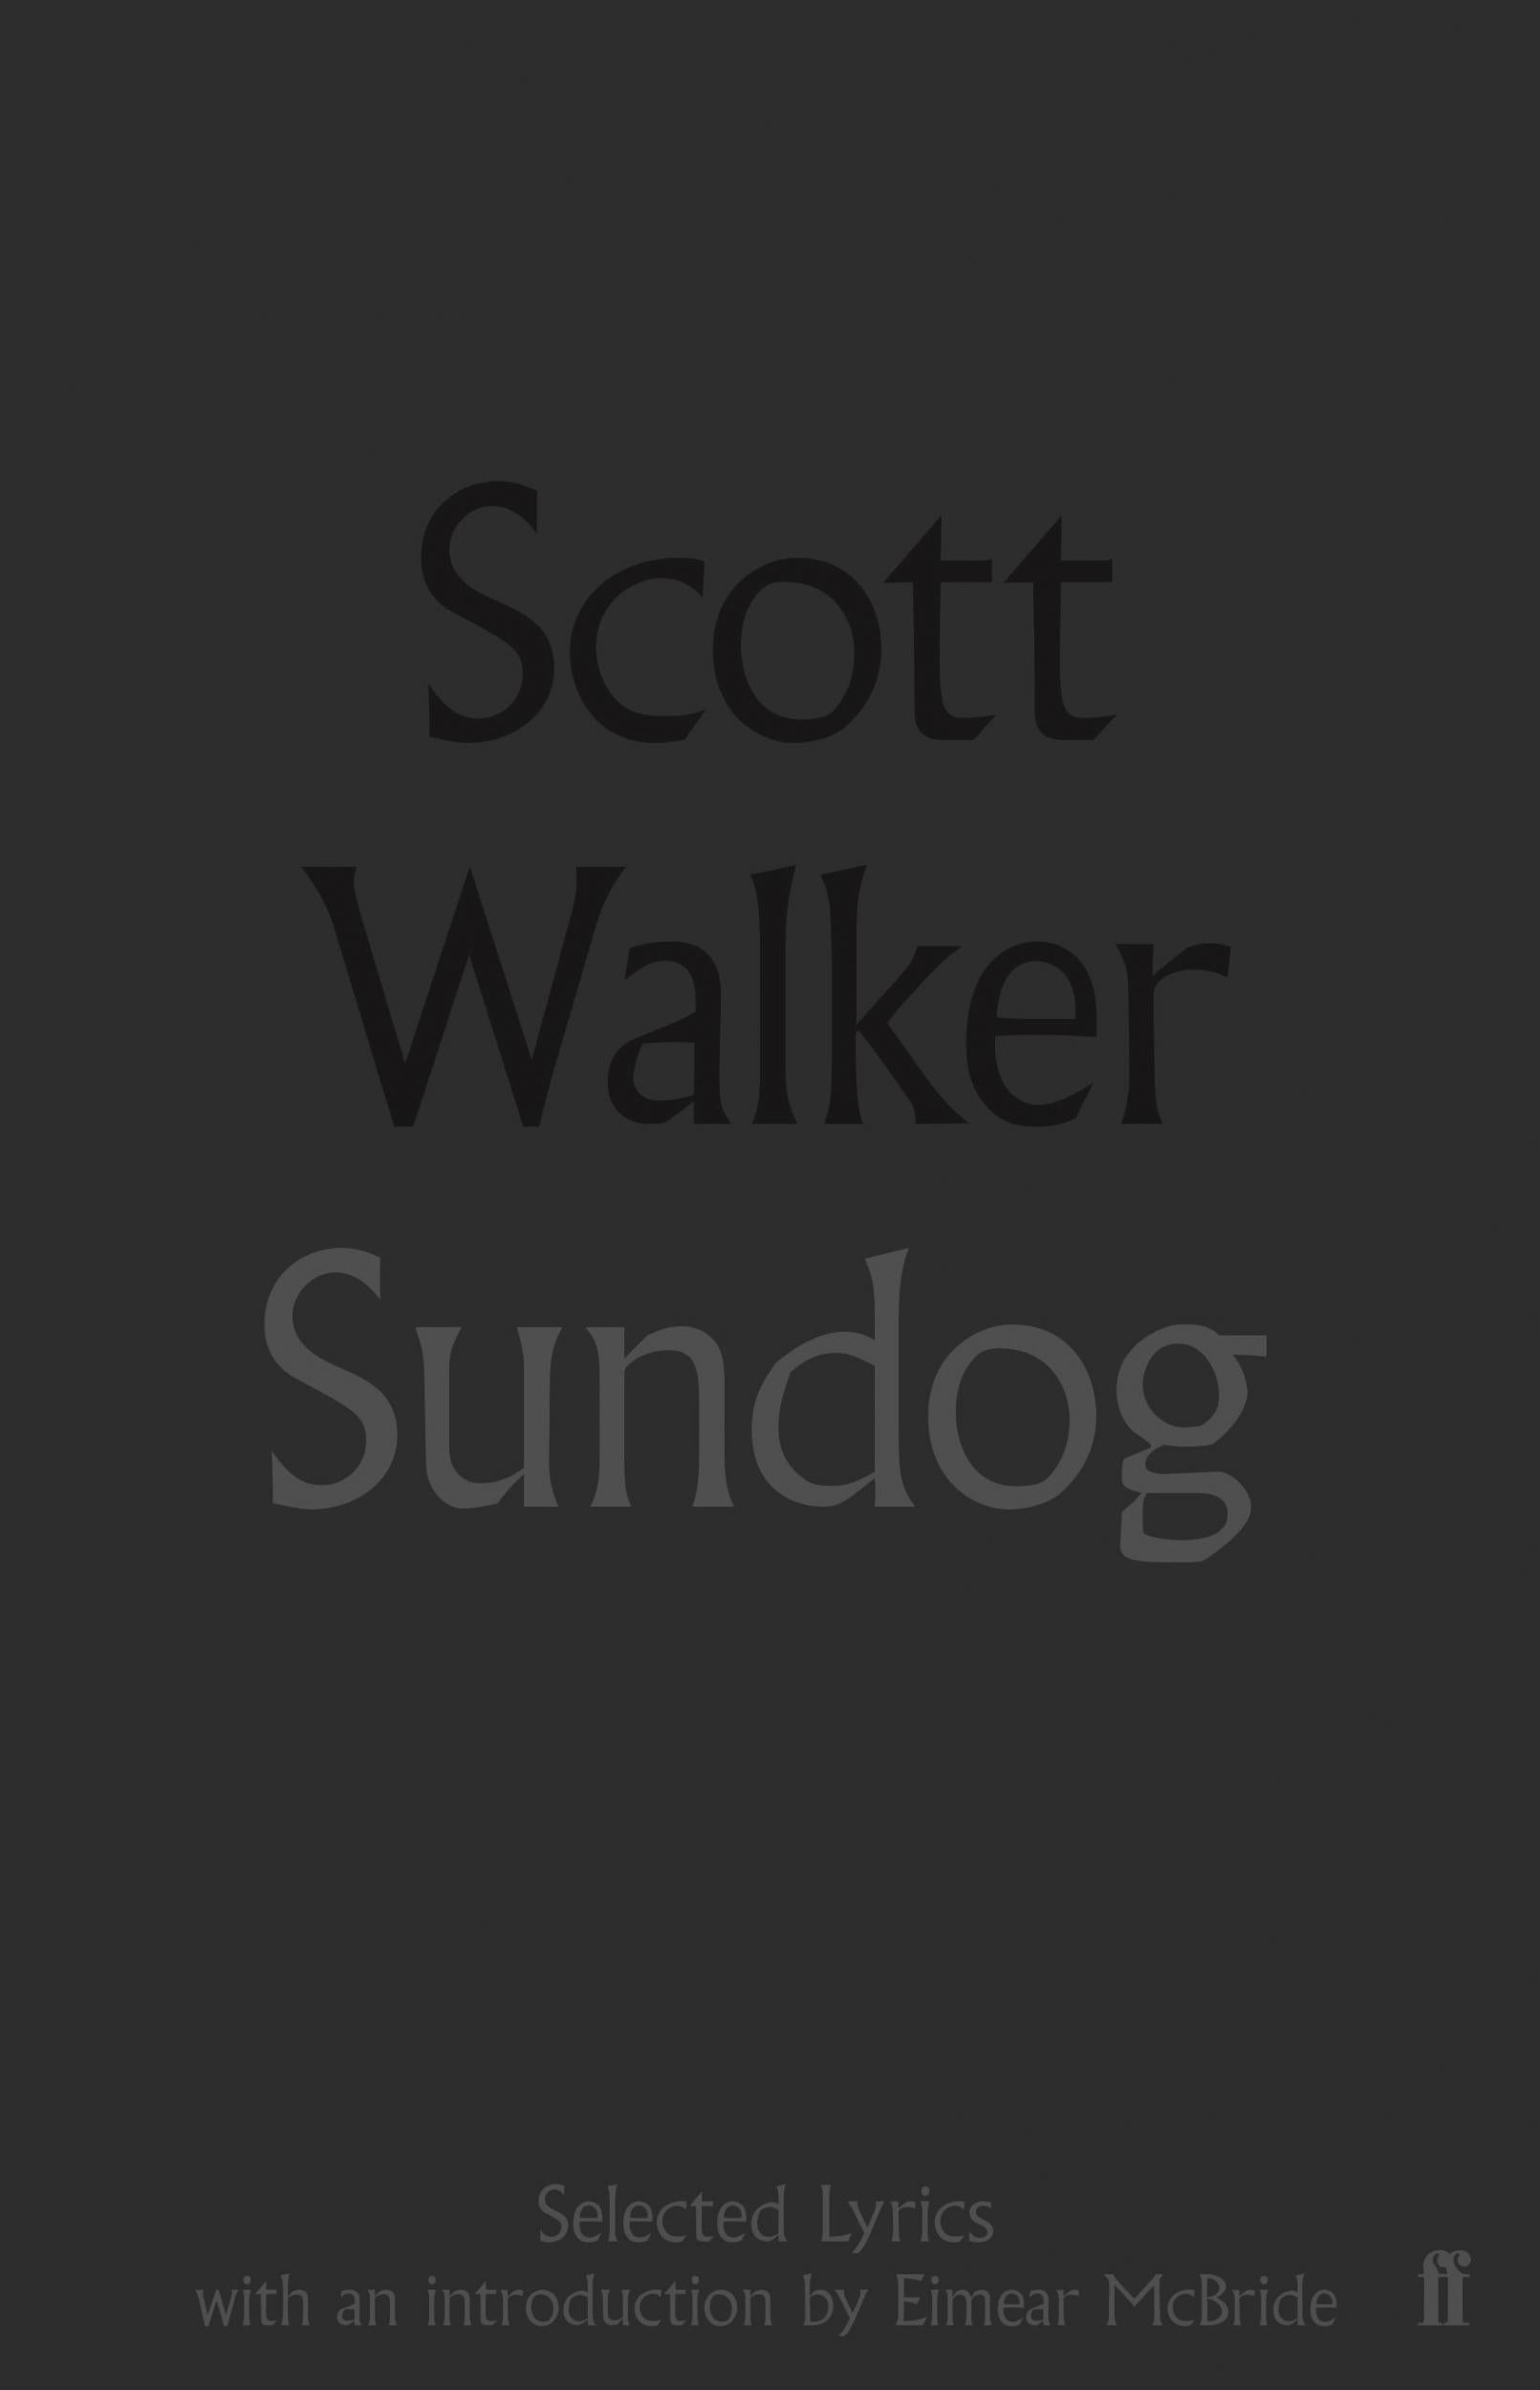 ‘Sundog: Selected Lyrics’ by Scott Walker is the latest lyric book to come out